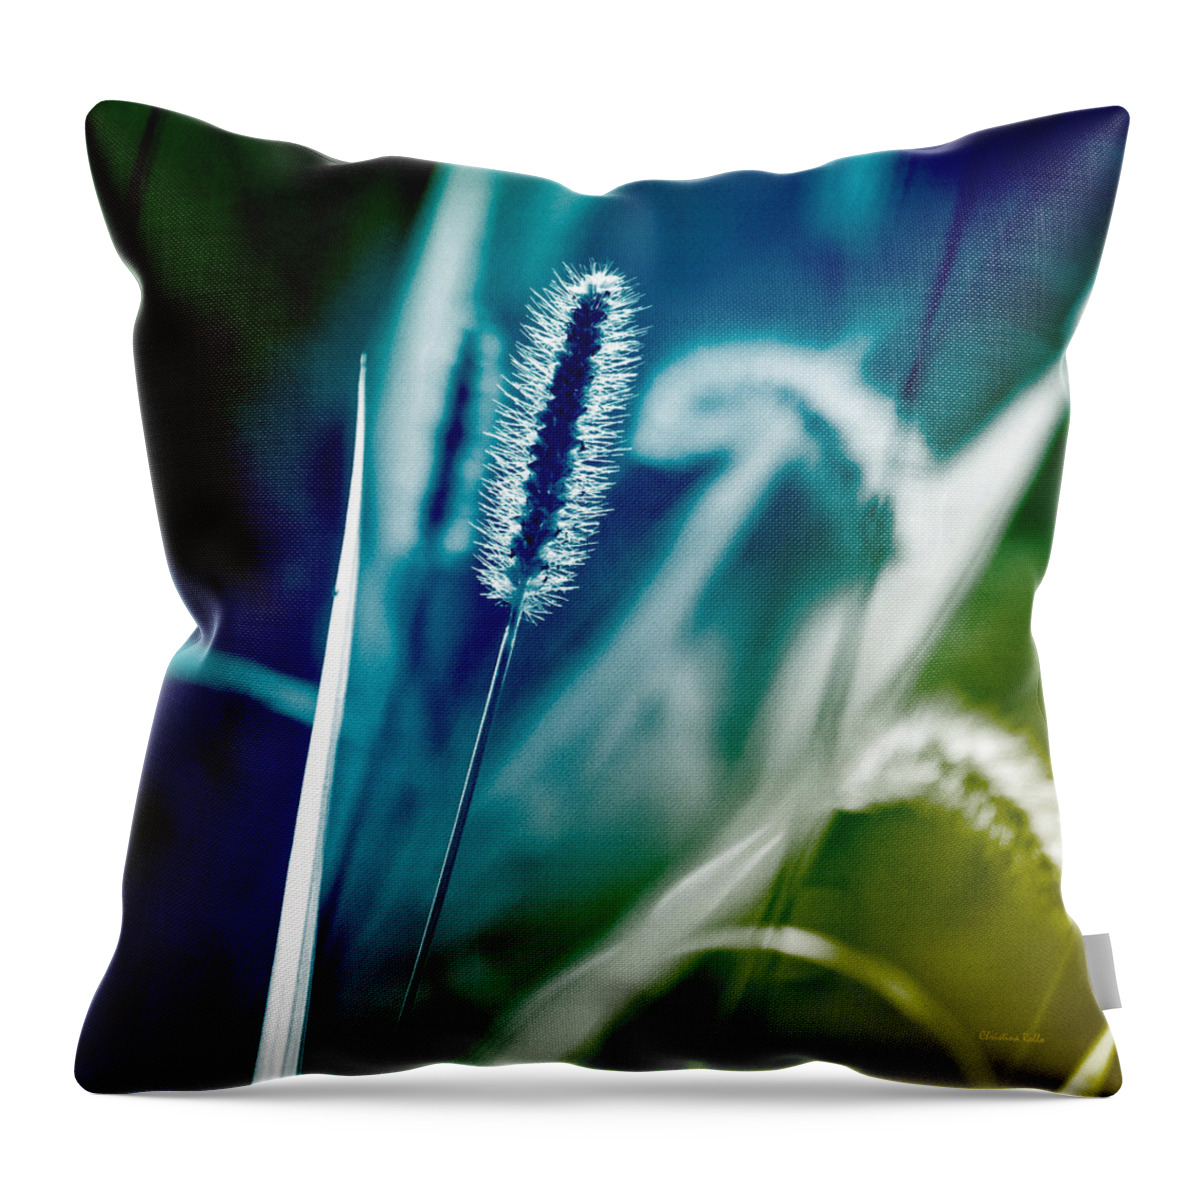 Grass Throw Pillow featuring the photograph Blue Grass Abstract by Christina Rollo